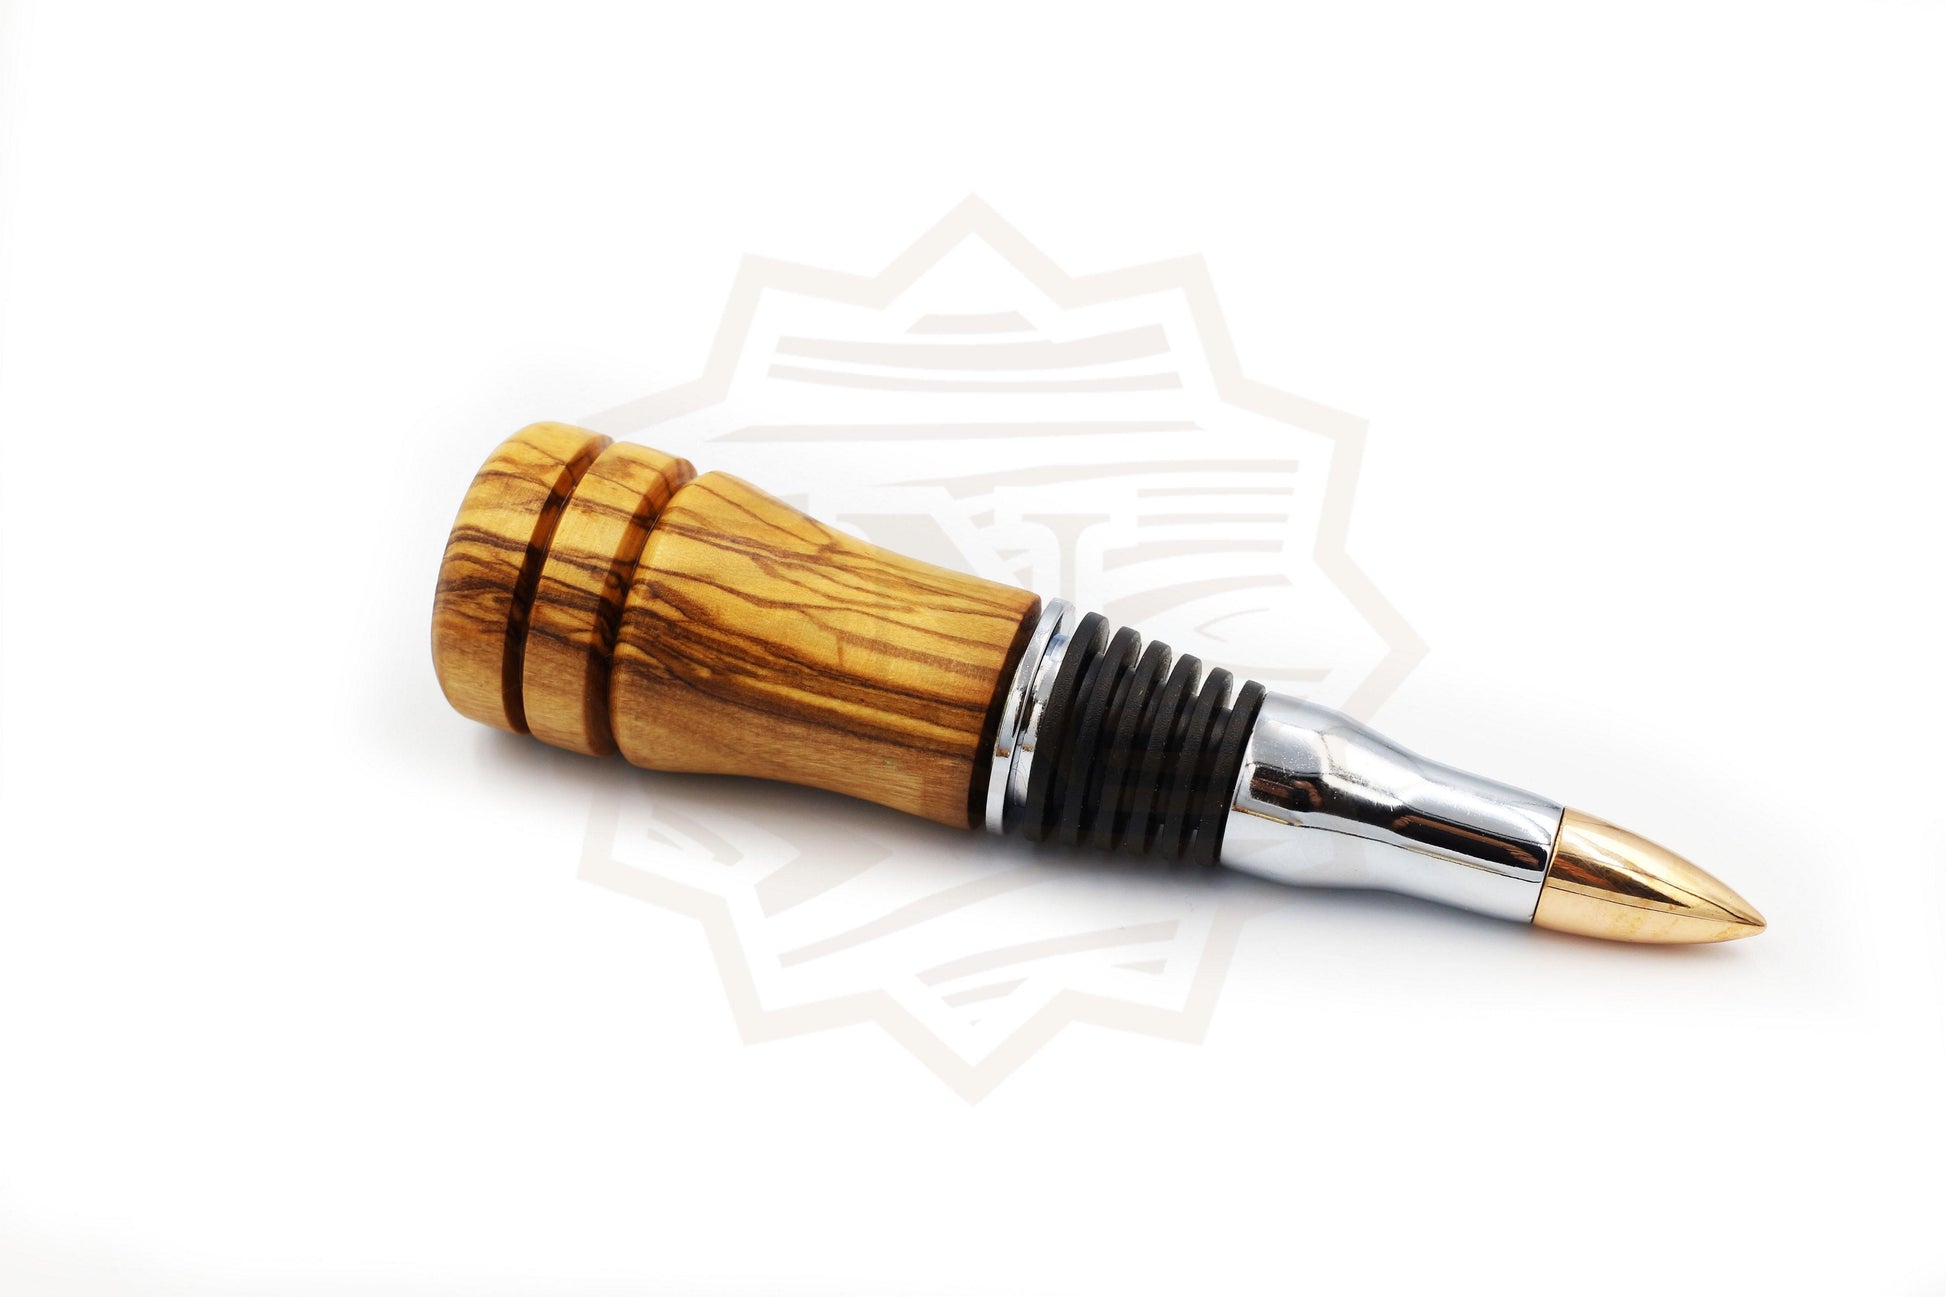 One-of-a-kind olive wood bottle stopper for wine lovers